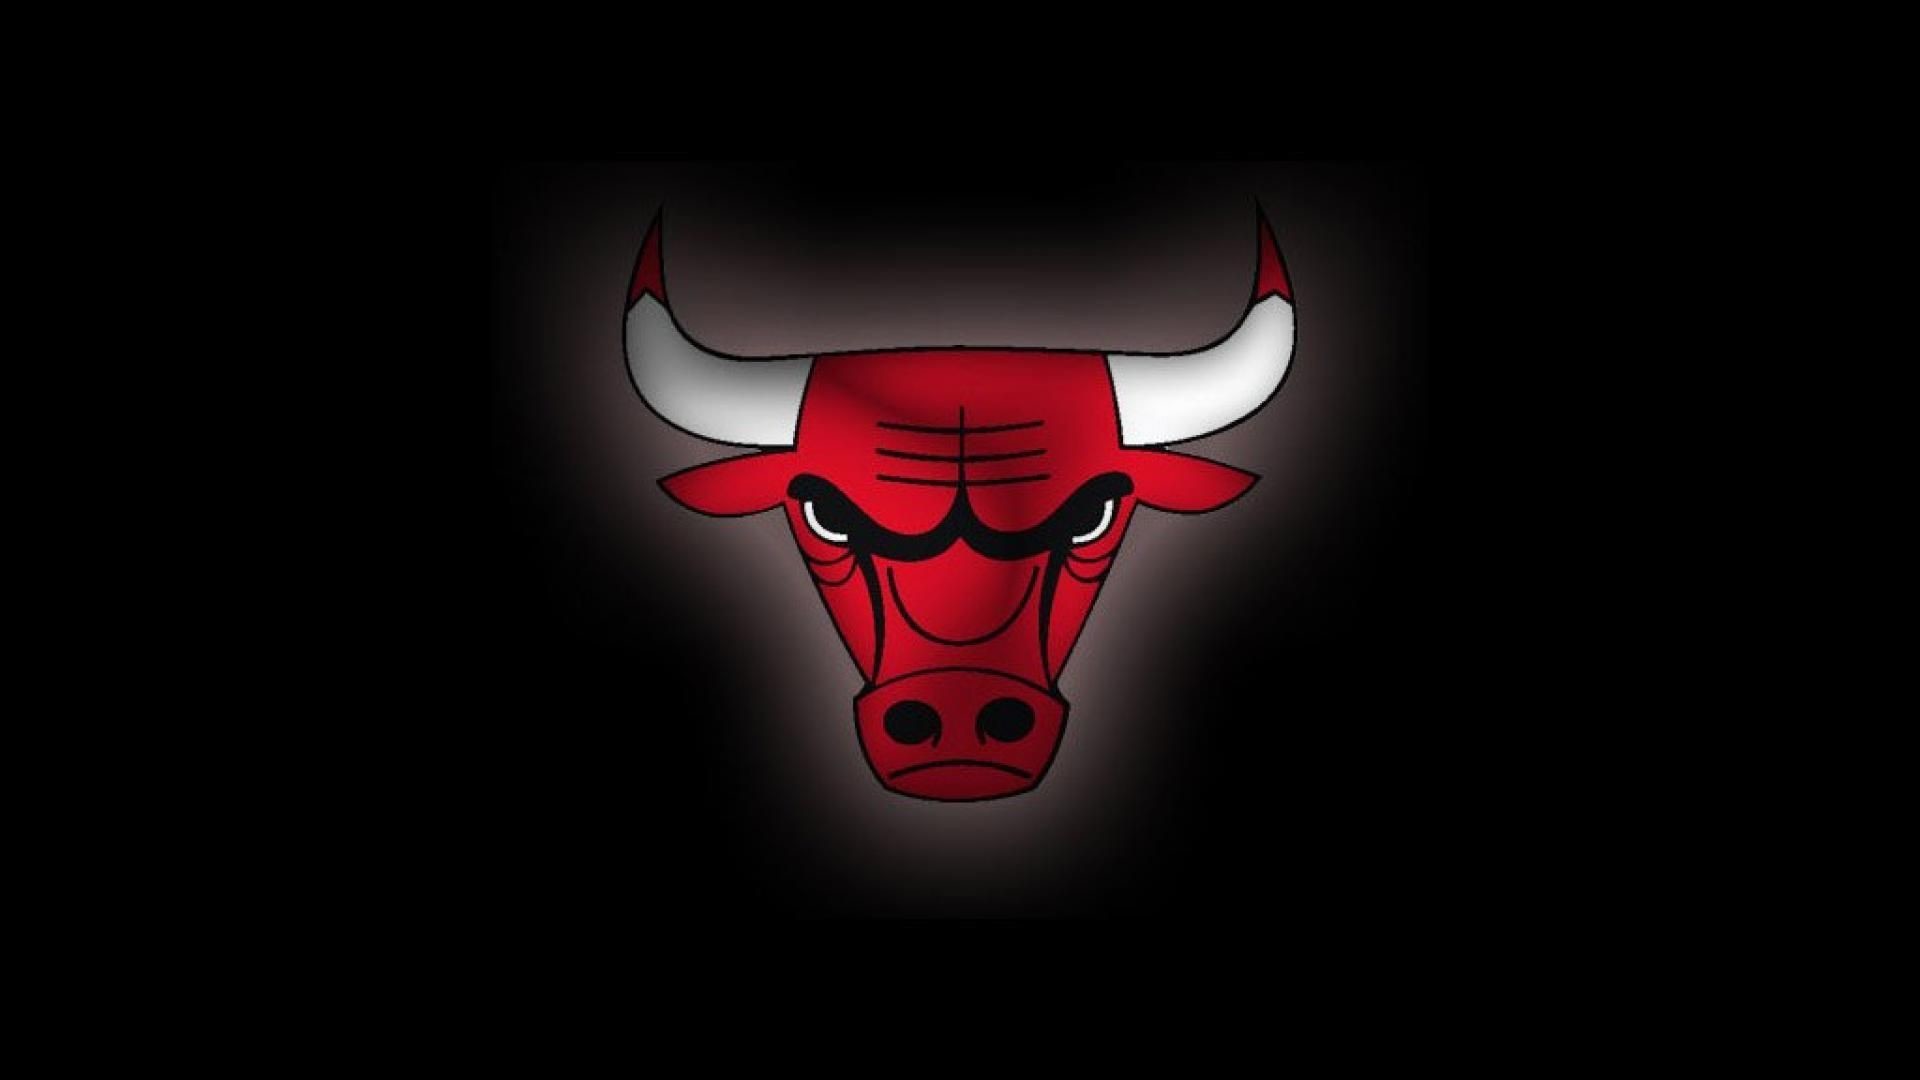 Bulls 4K wallpapers for your desktop or mobile screen free and easy to  download